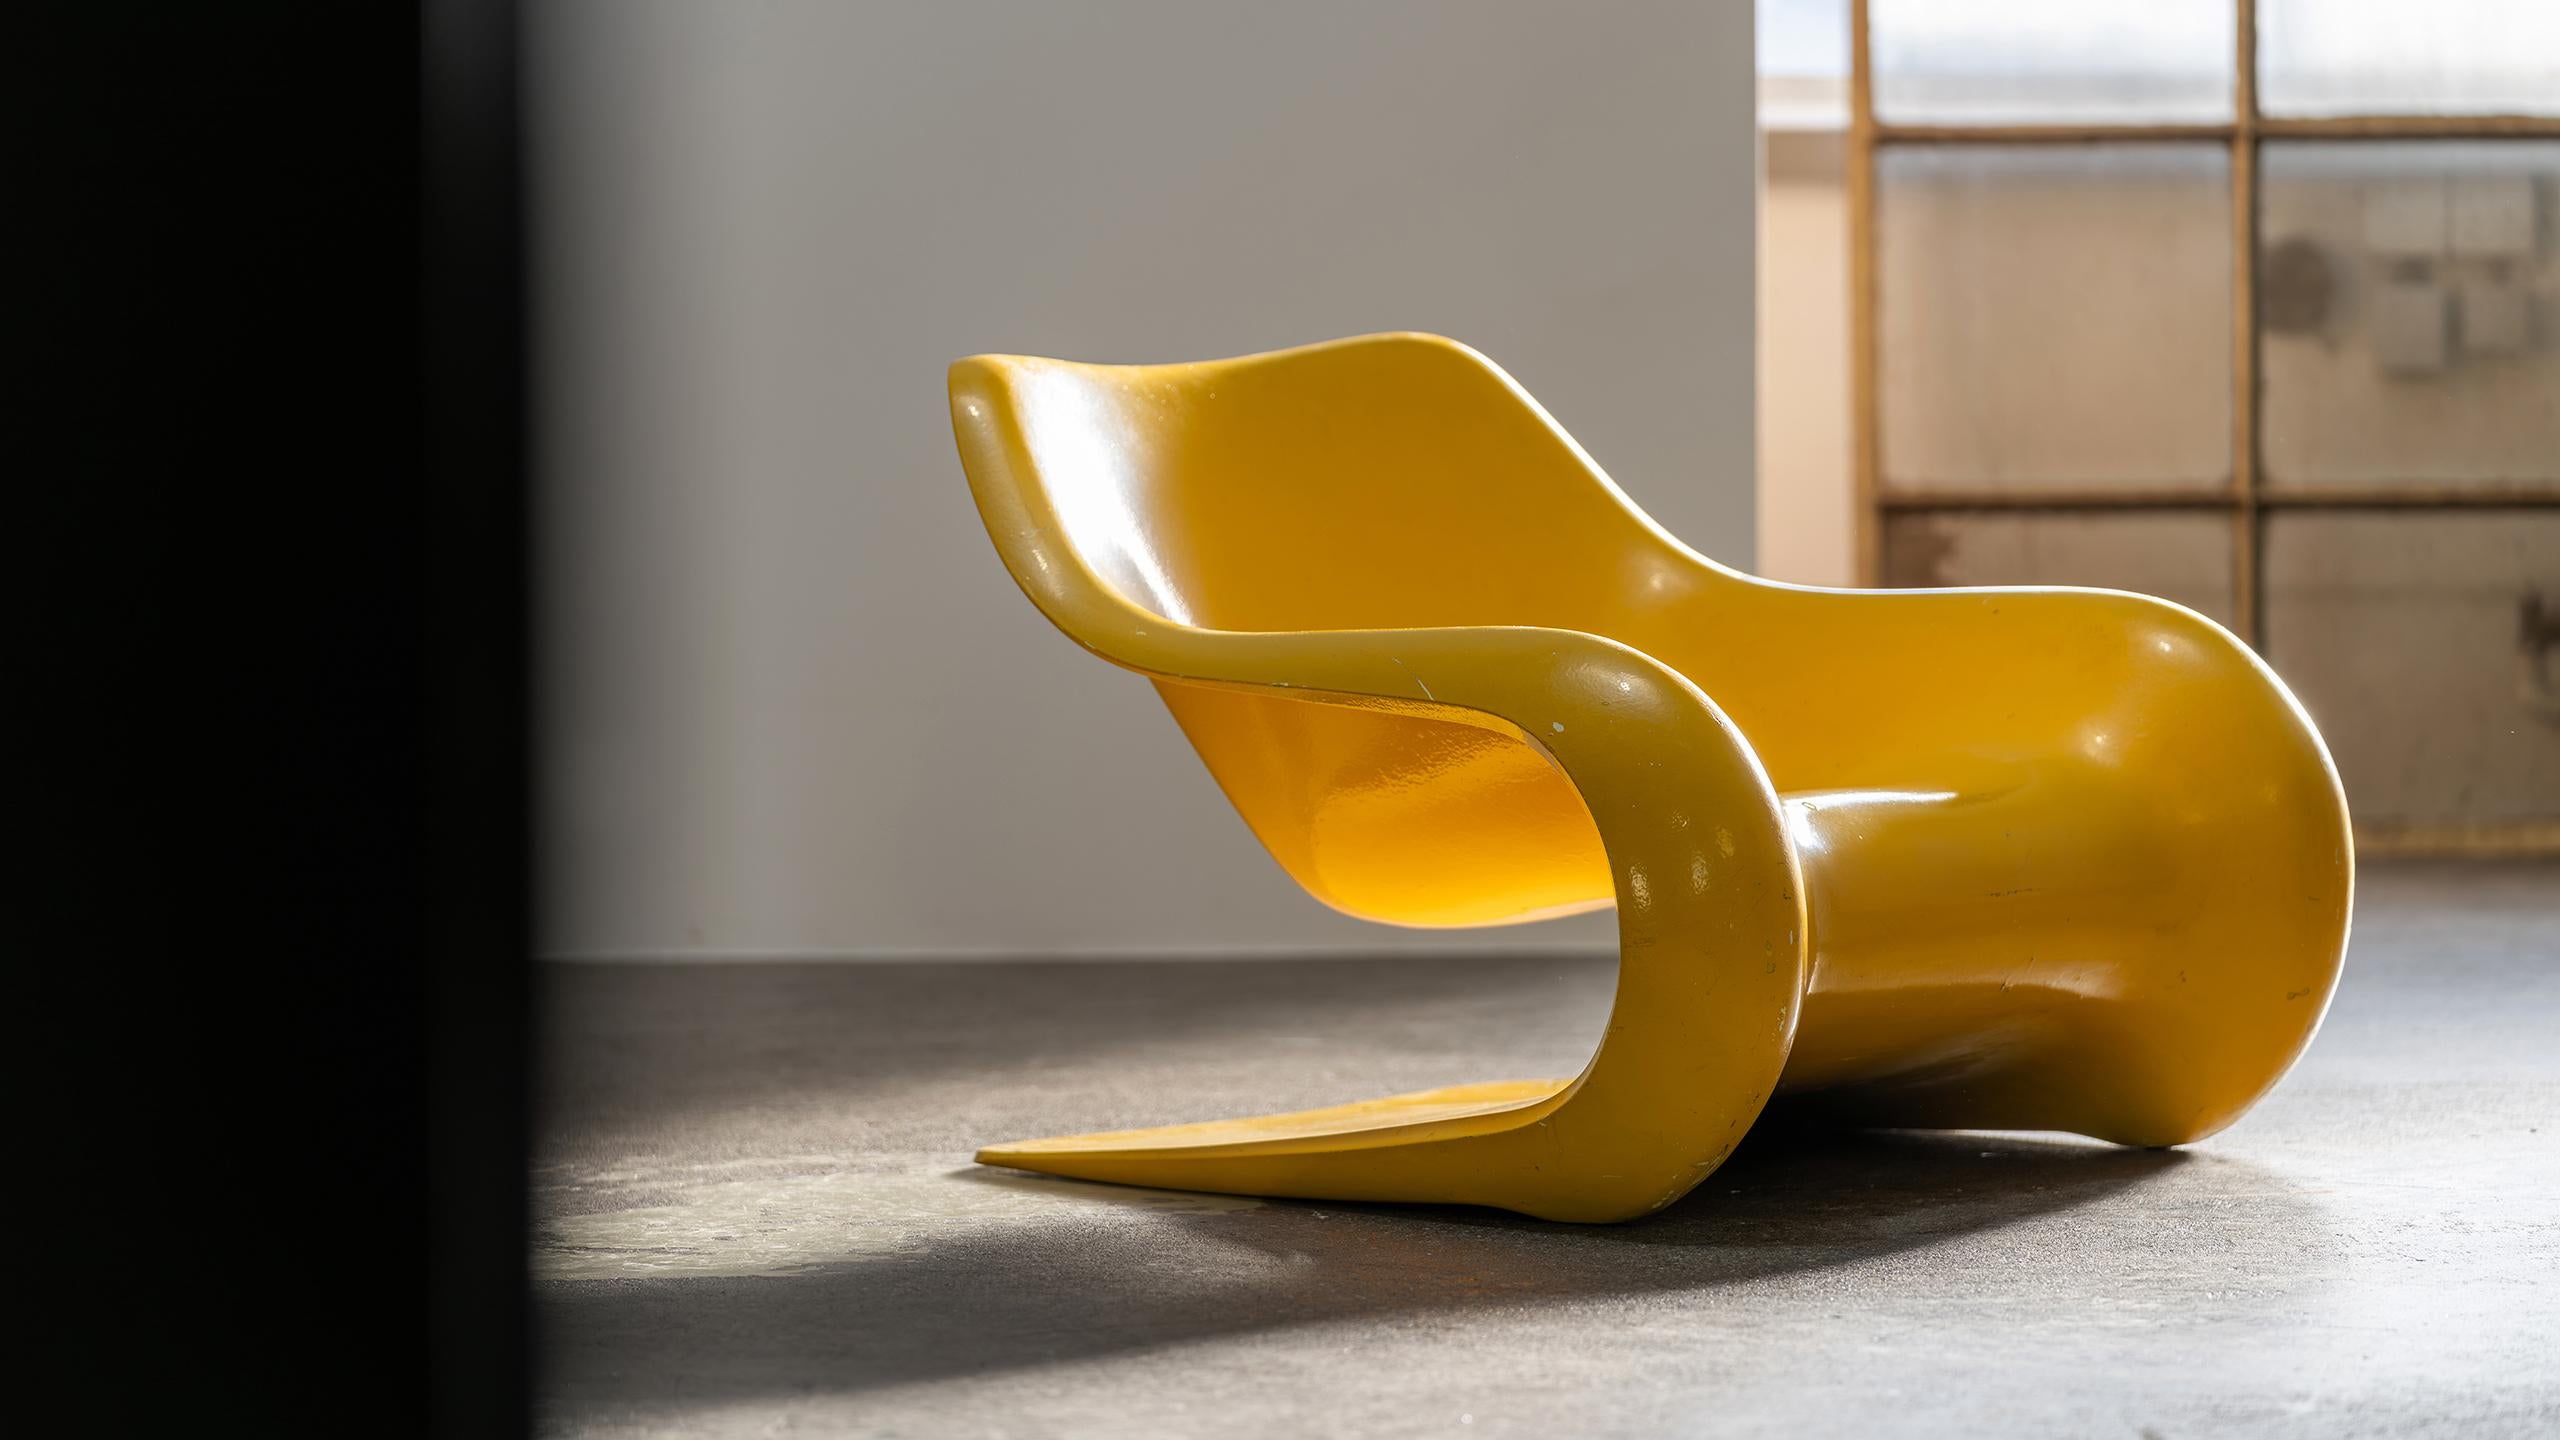 Targa Chair by Klaus Uredat, 19709 for Horn Collection, Germany - Organic Design 9